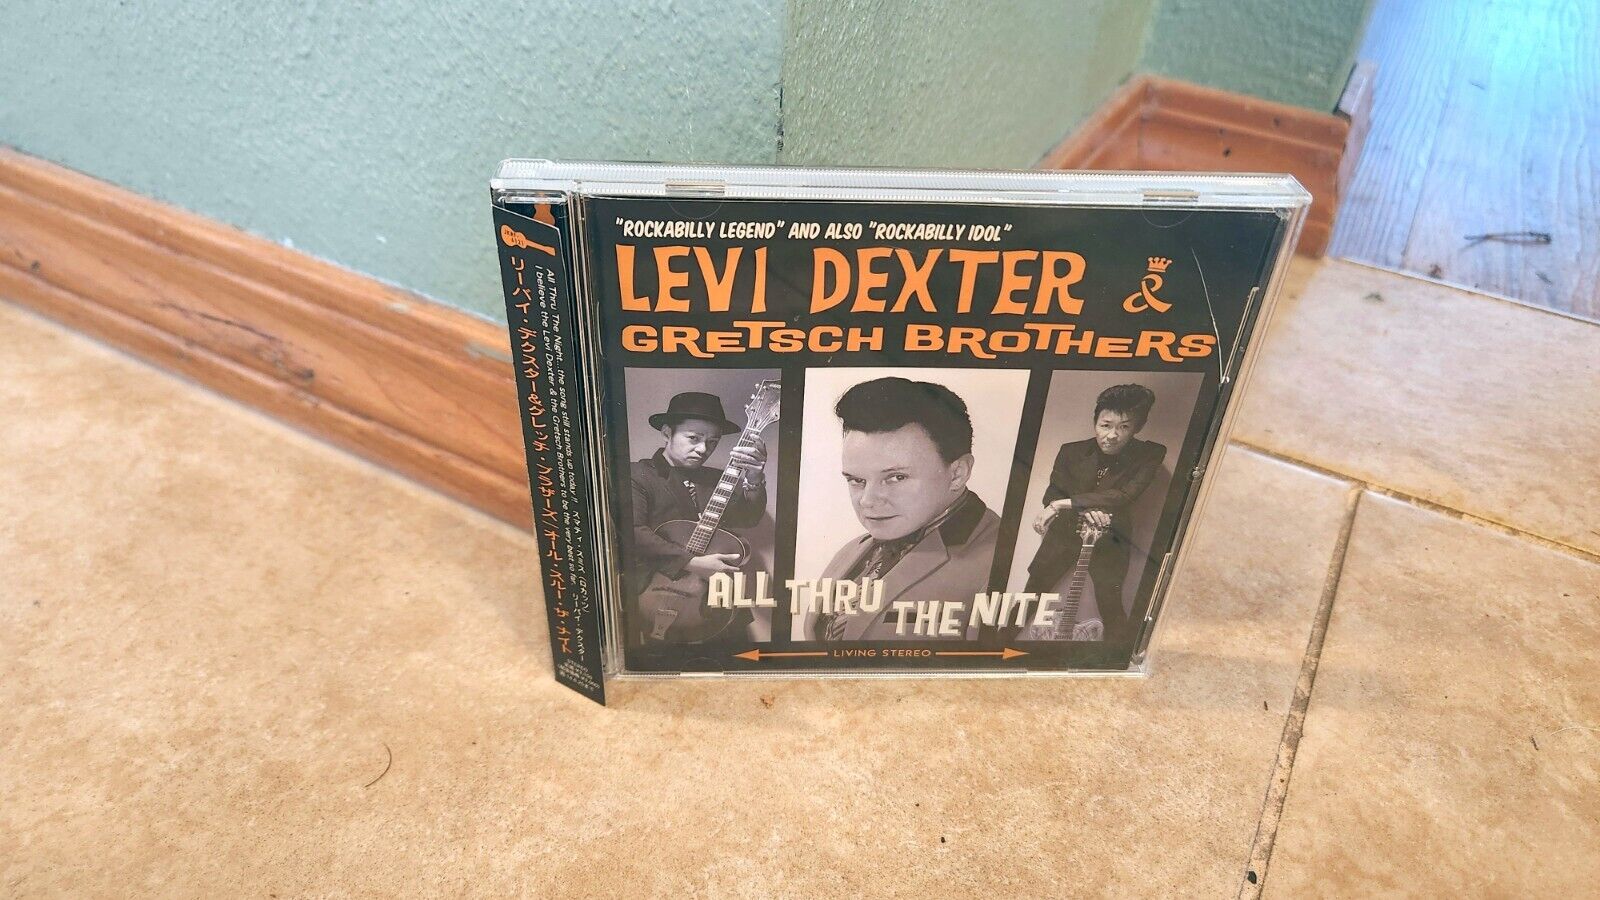 Levi Dexter & Gretsch Brothers All Thru The Nite cd Japan issue Through Night